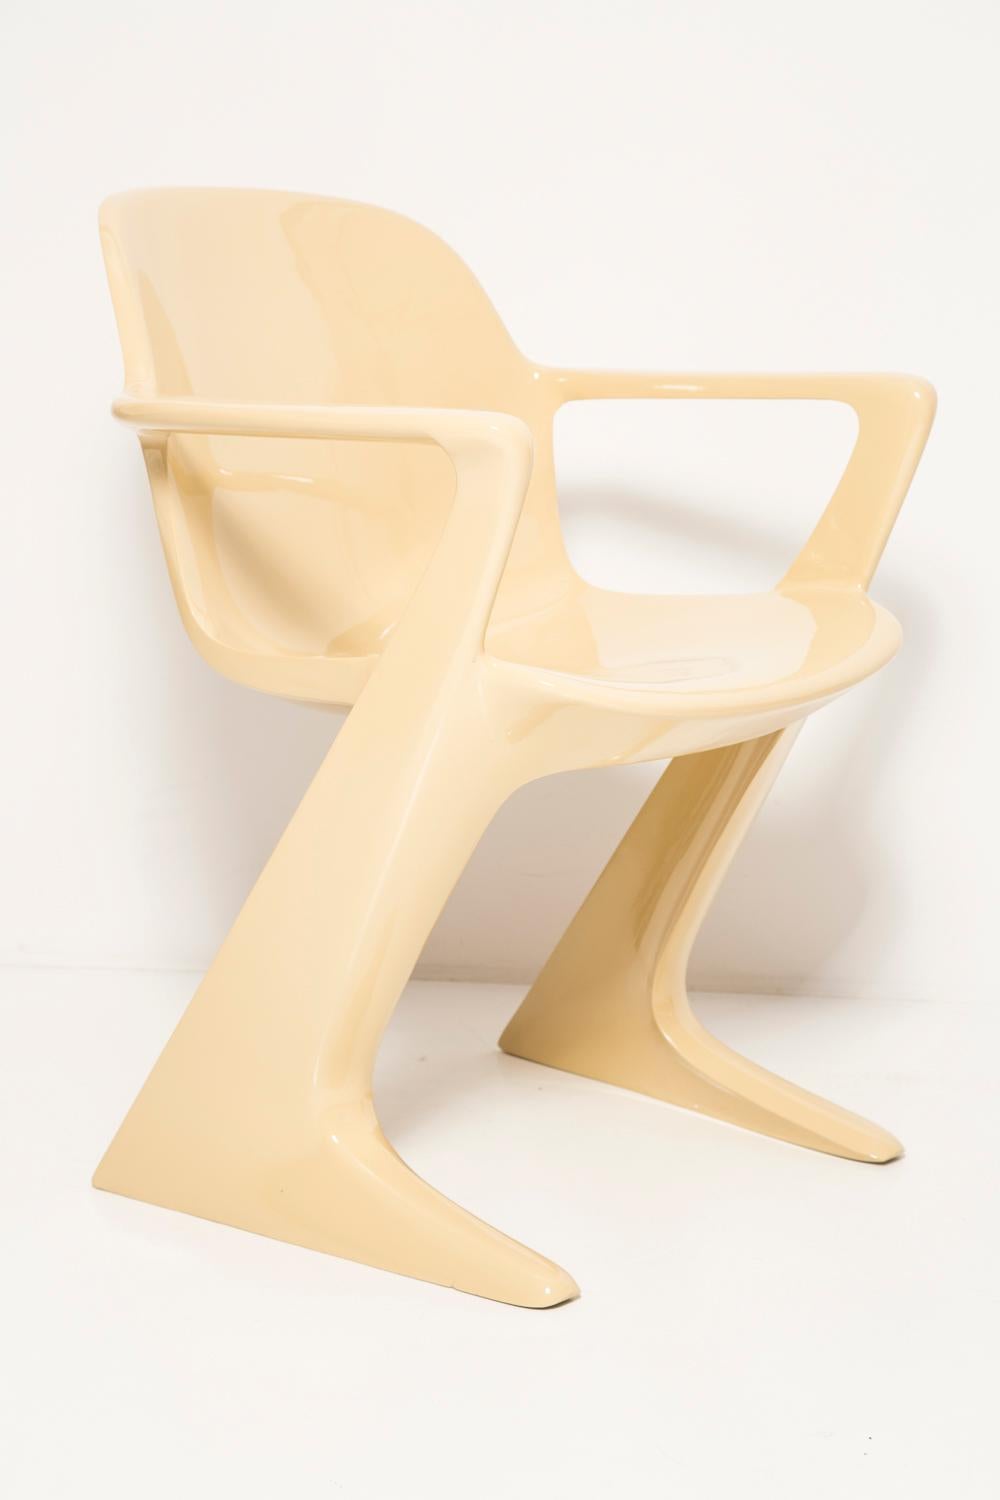 20th Century Set of Eight Beige Kangaroo Chairs, by Ernst Moeckl, Germany, 1968 For Sale